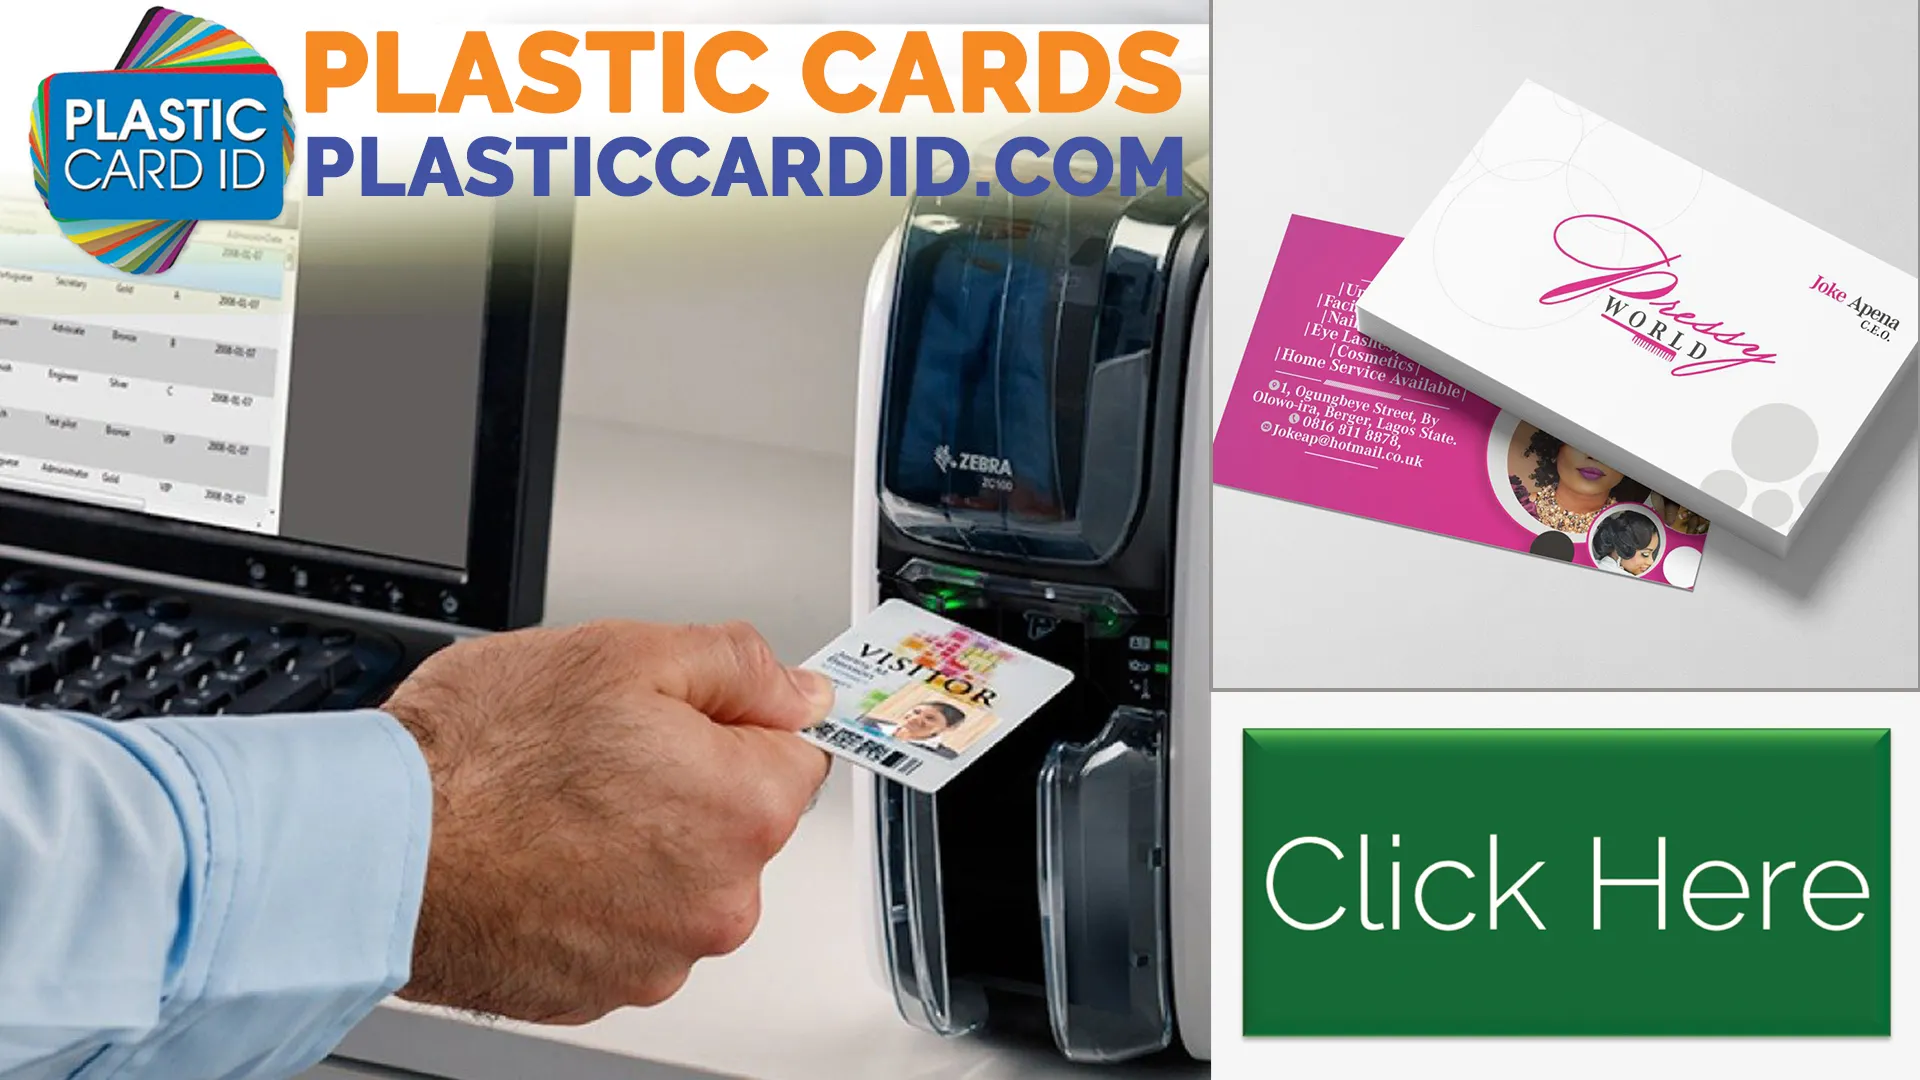 Welcome to Unmatched Quality in Plastic Card Printing